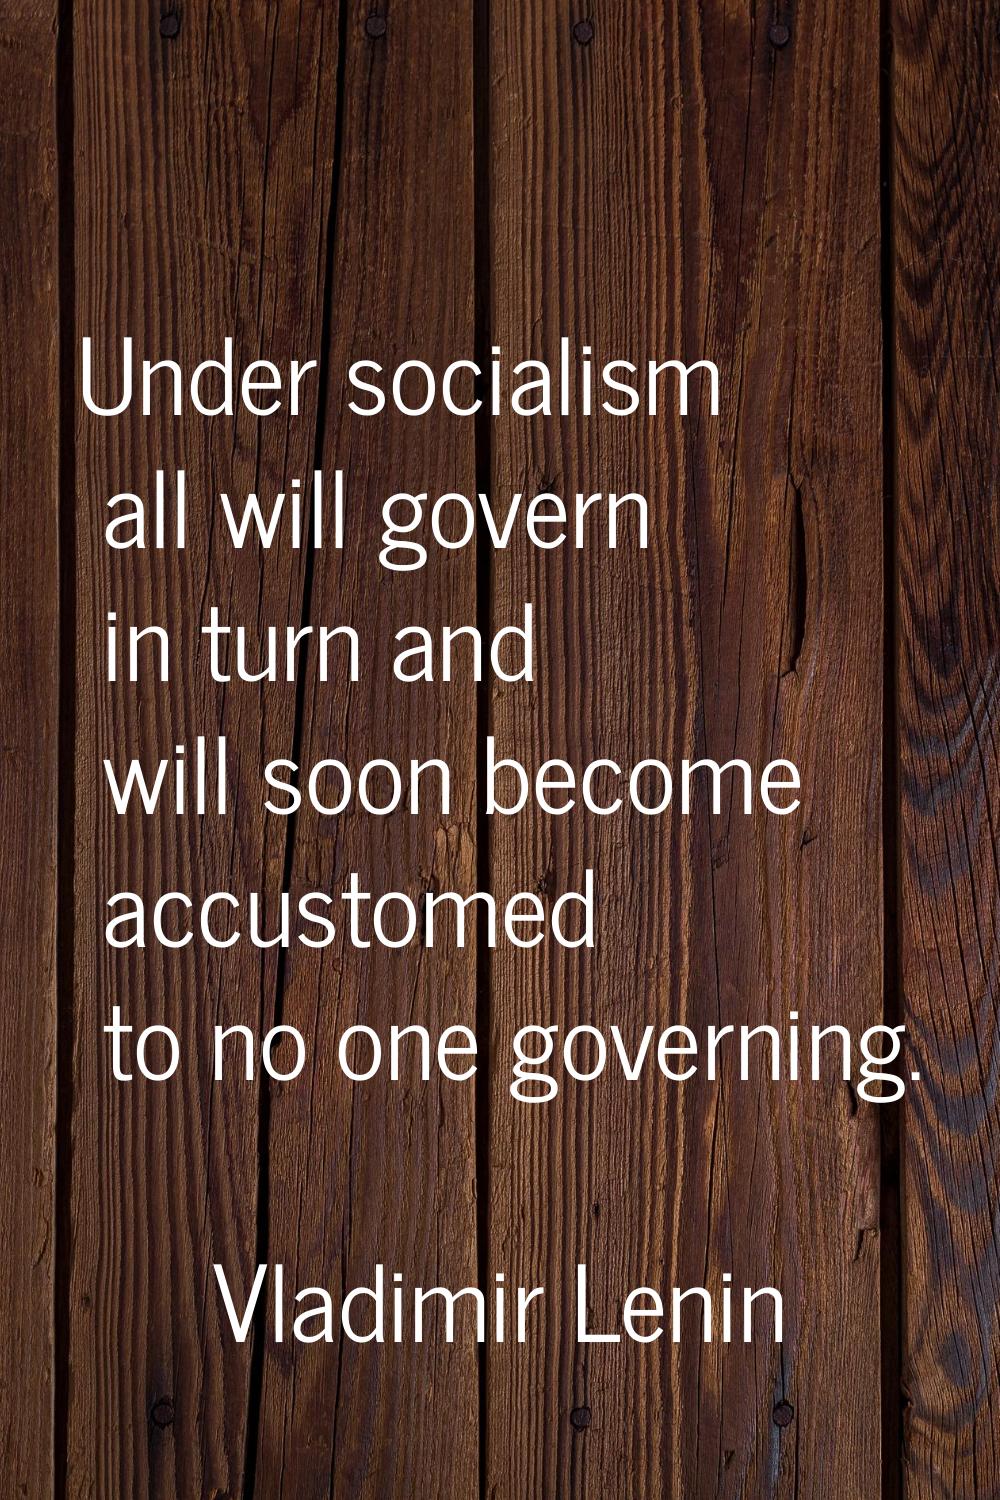 Under socialism all will govern in turn and will soon become accustomed to no one governing.